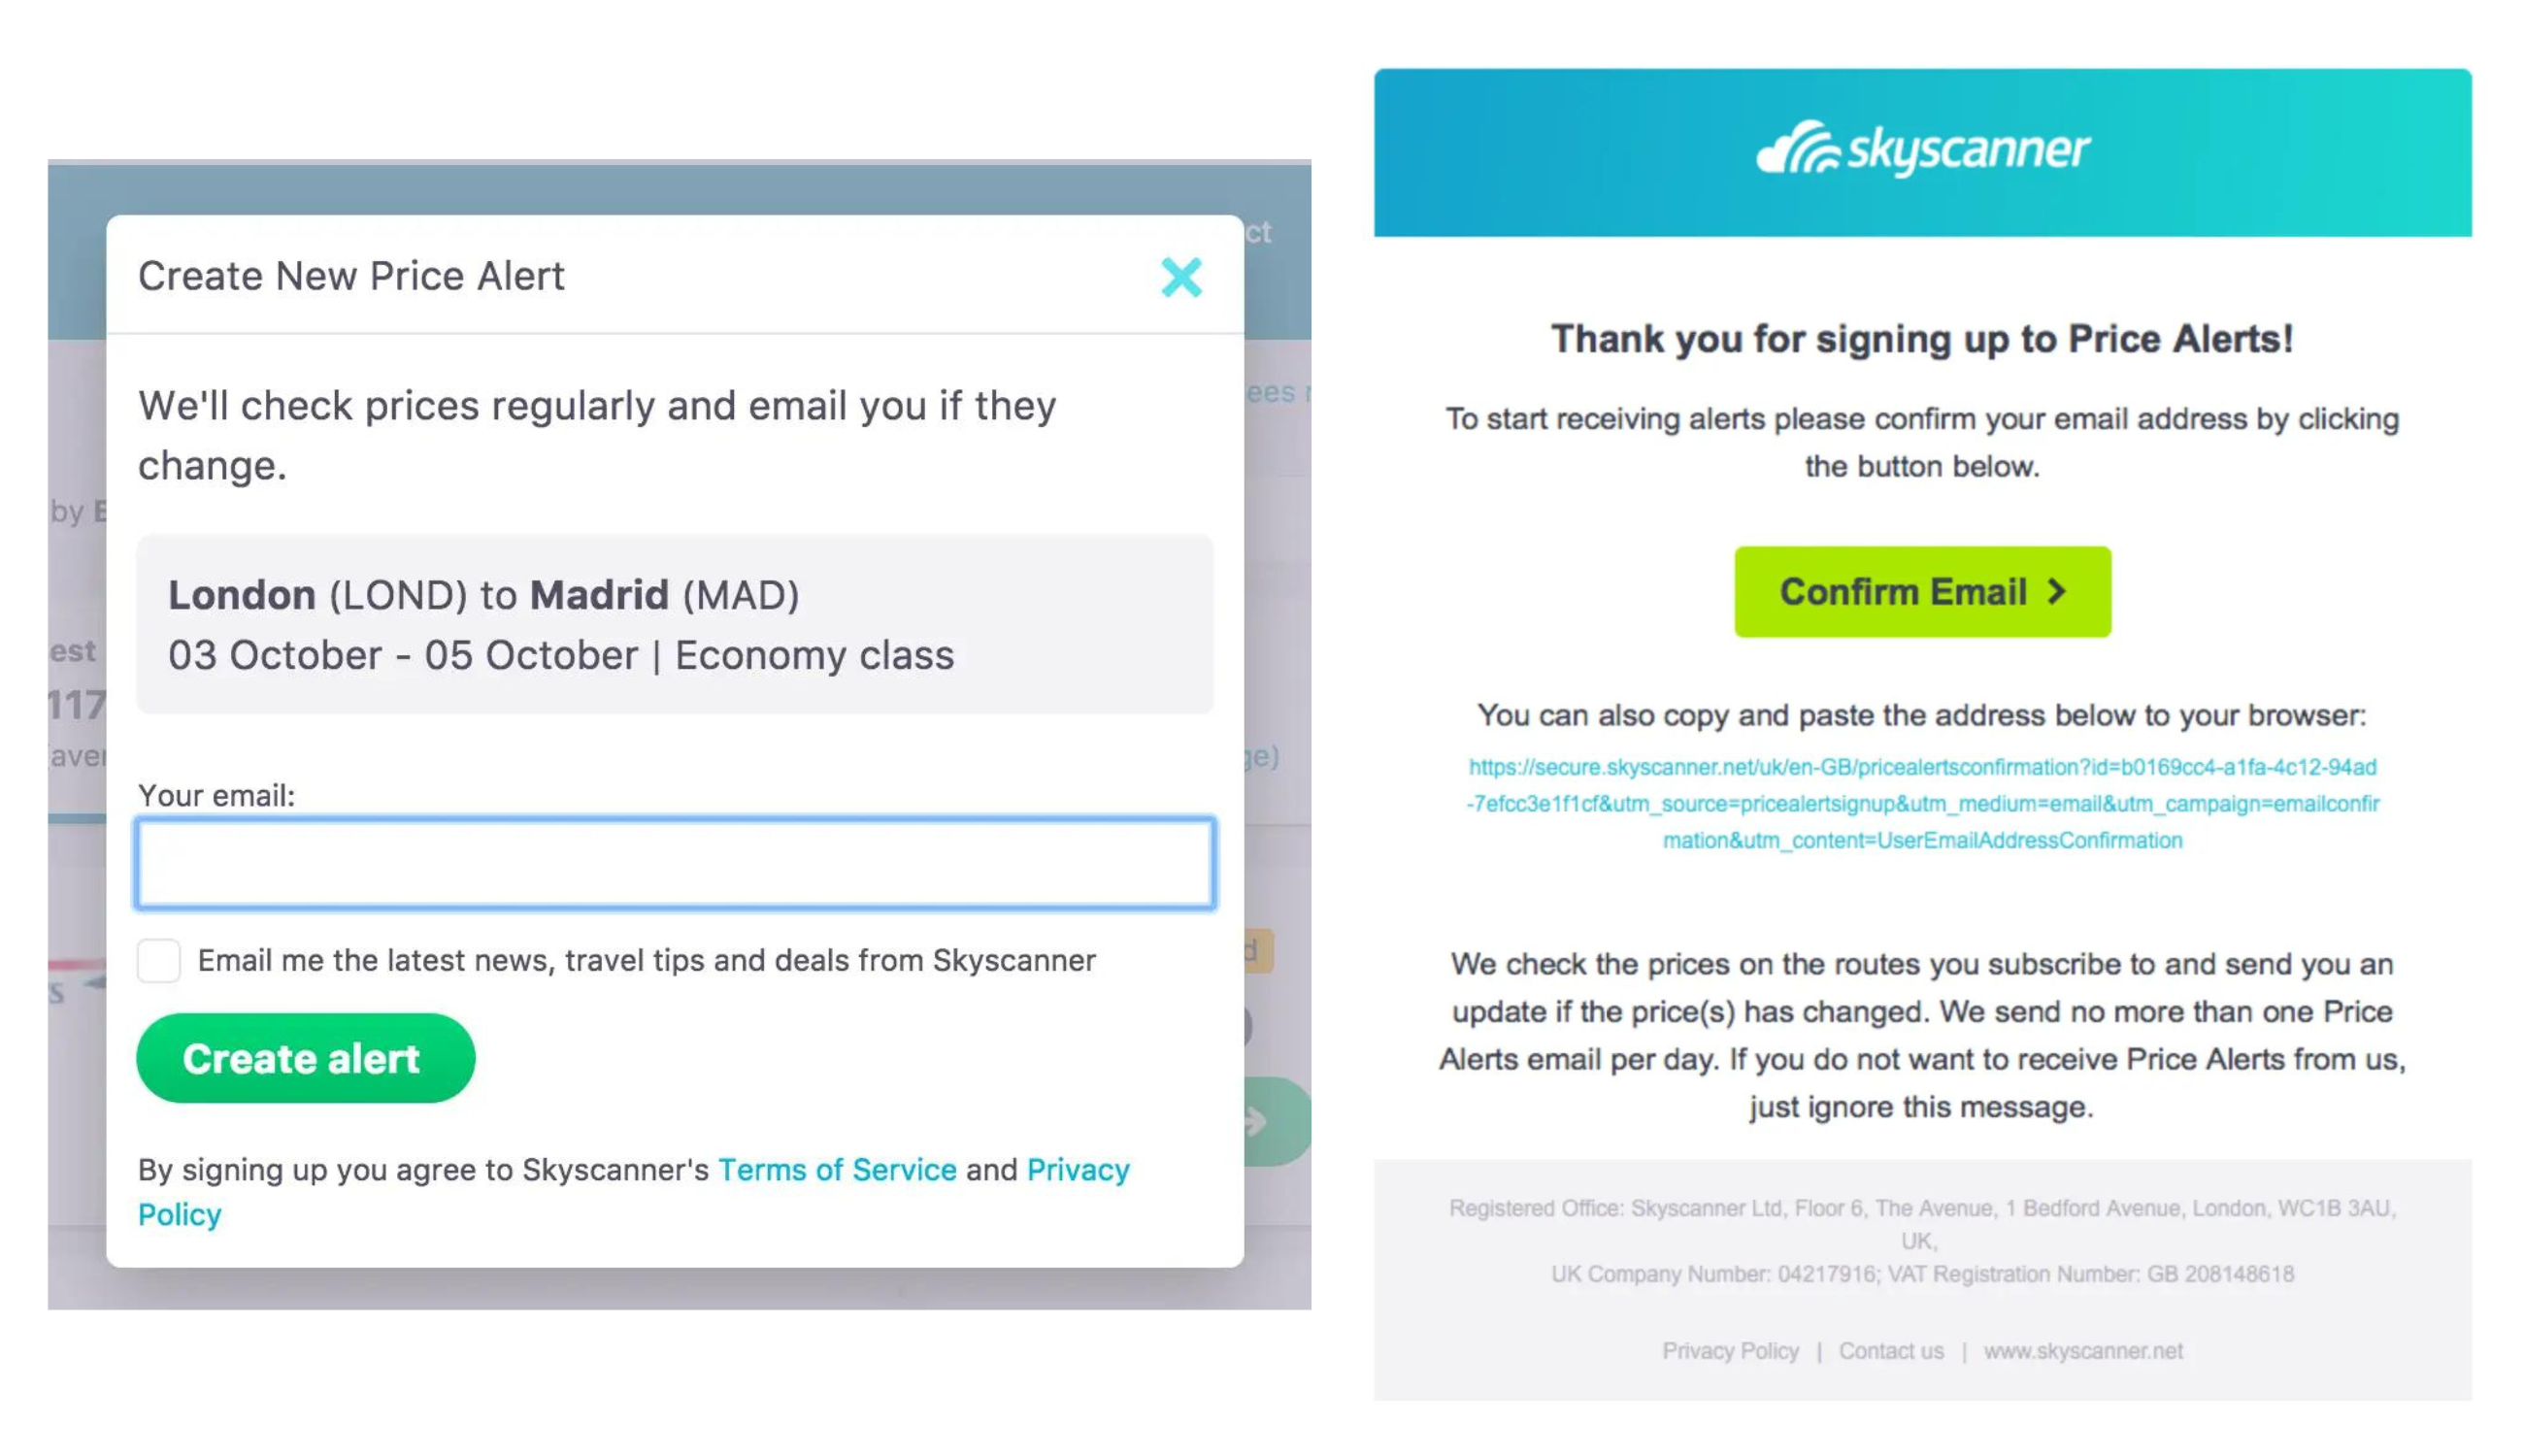 Skyscanner price alert opt-in form and confirmation email